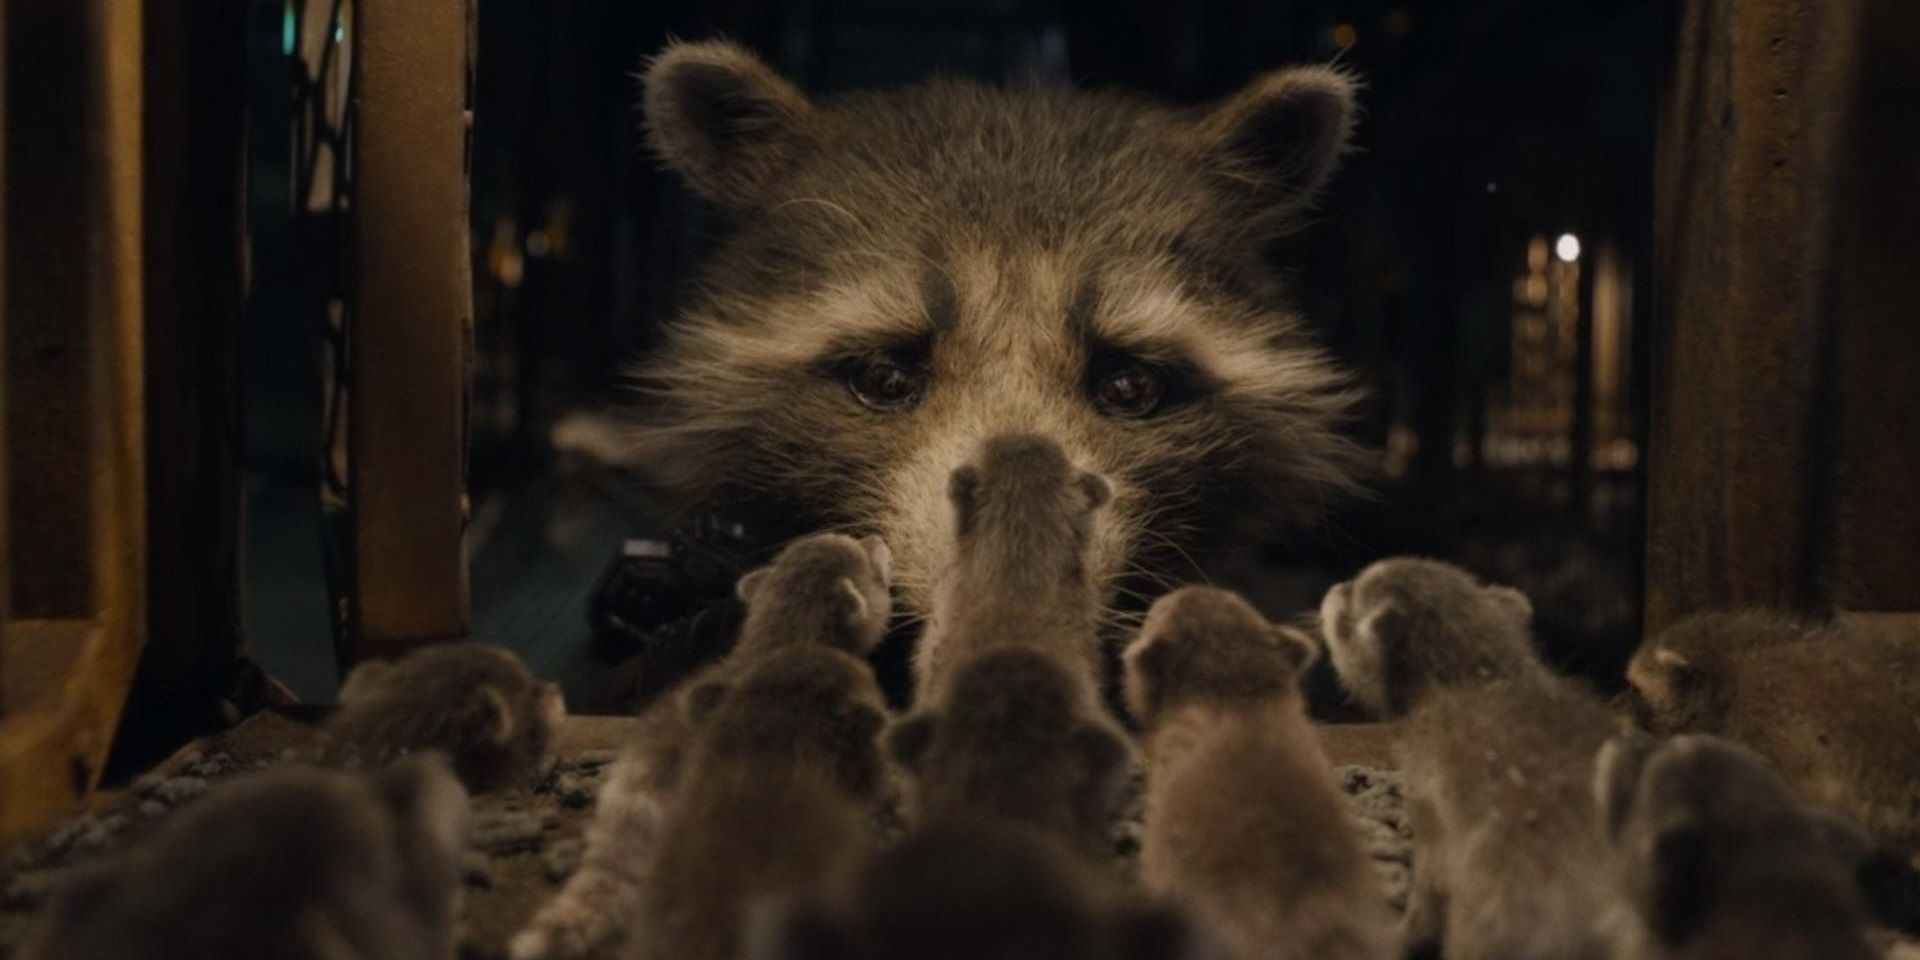 Rocket frees the baby raccoons in Guardians of the Galaxy Vol 3